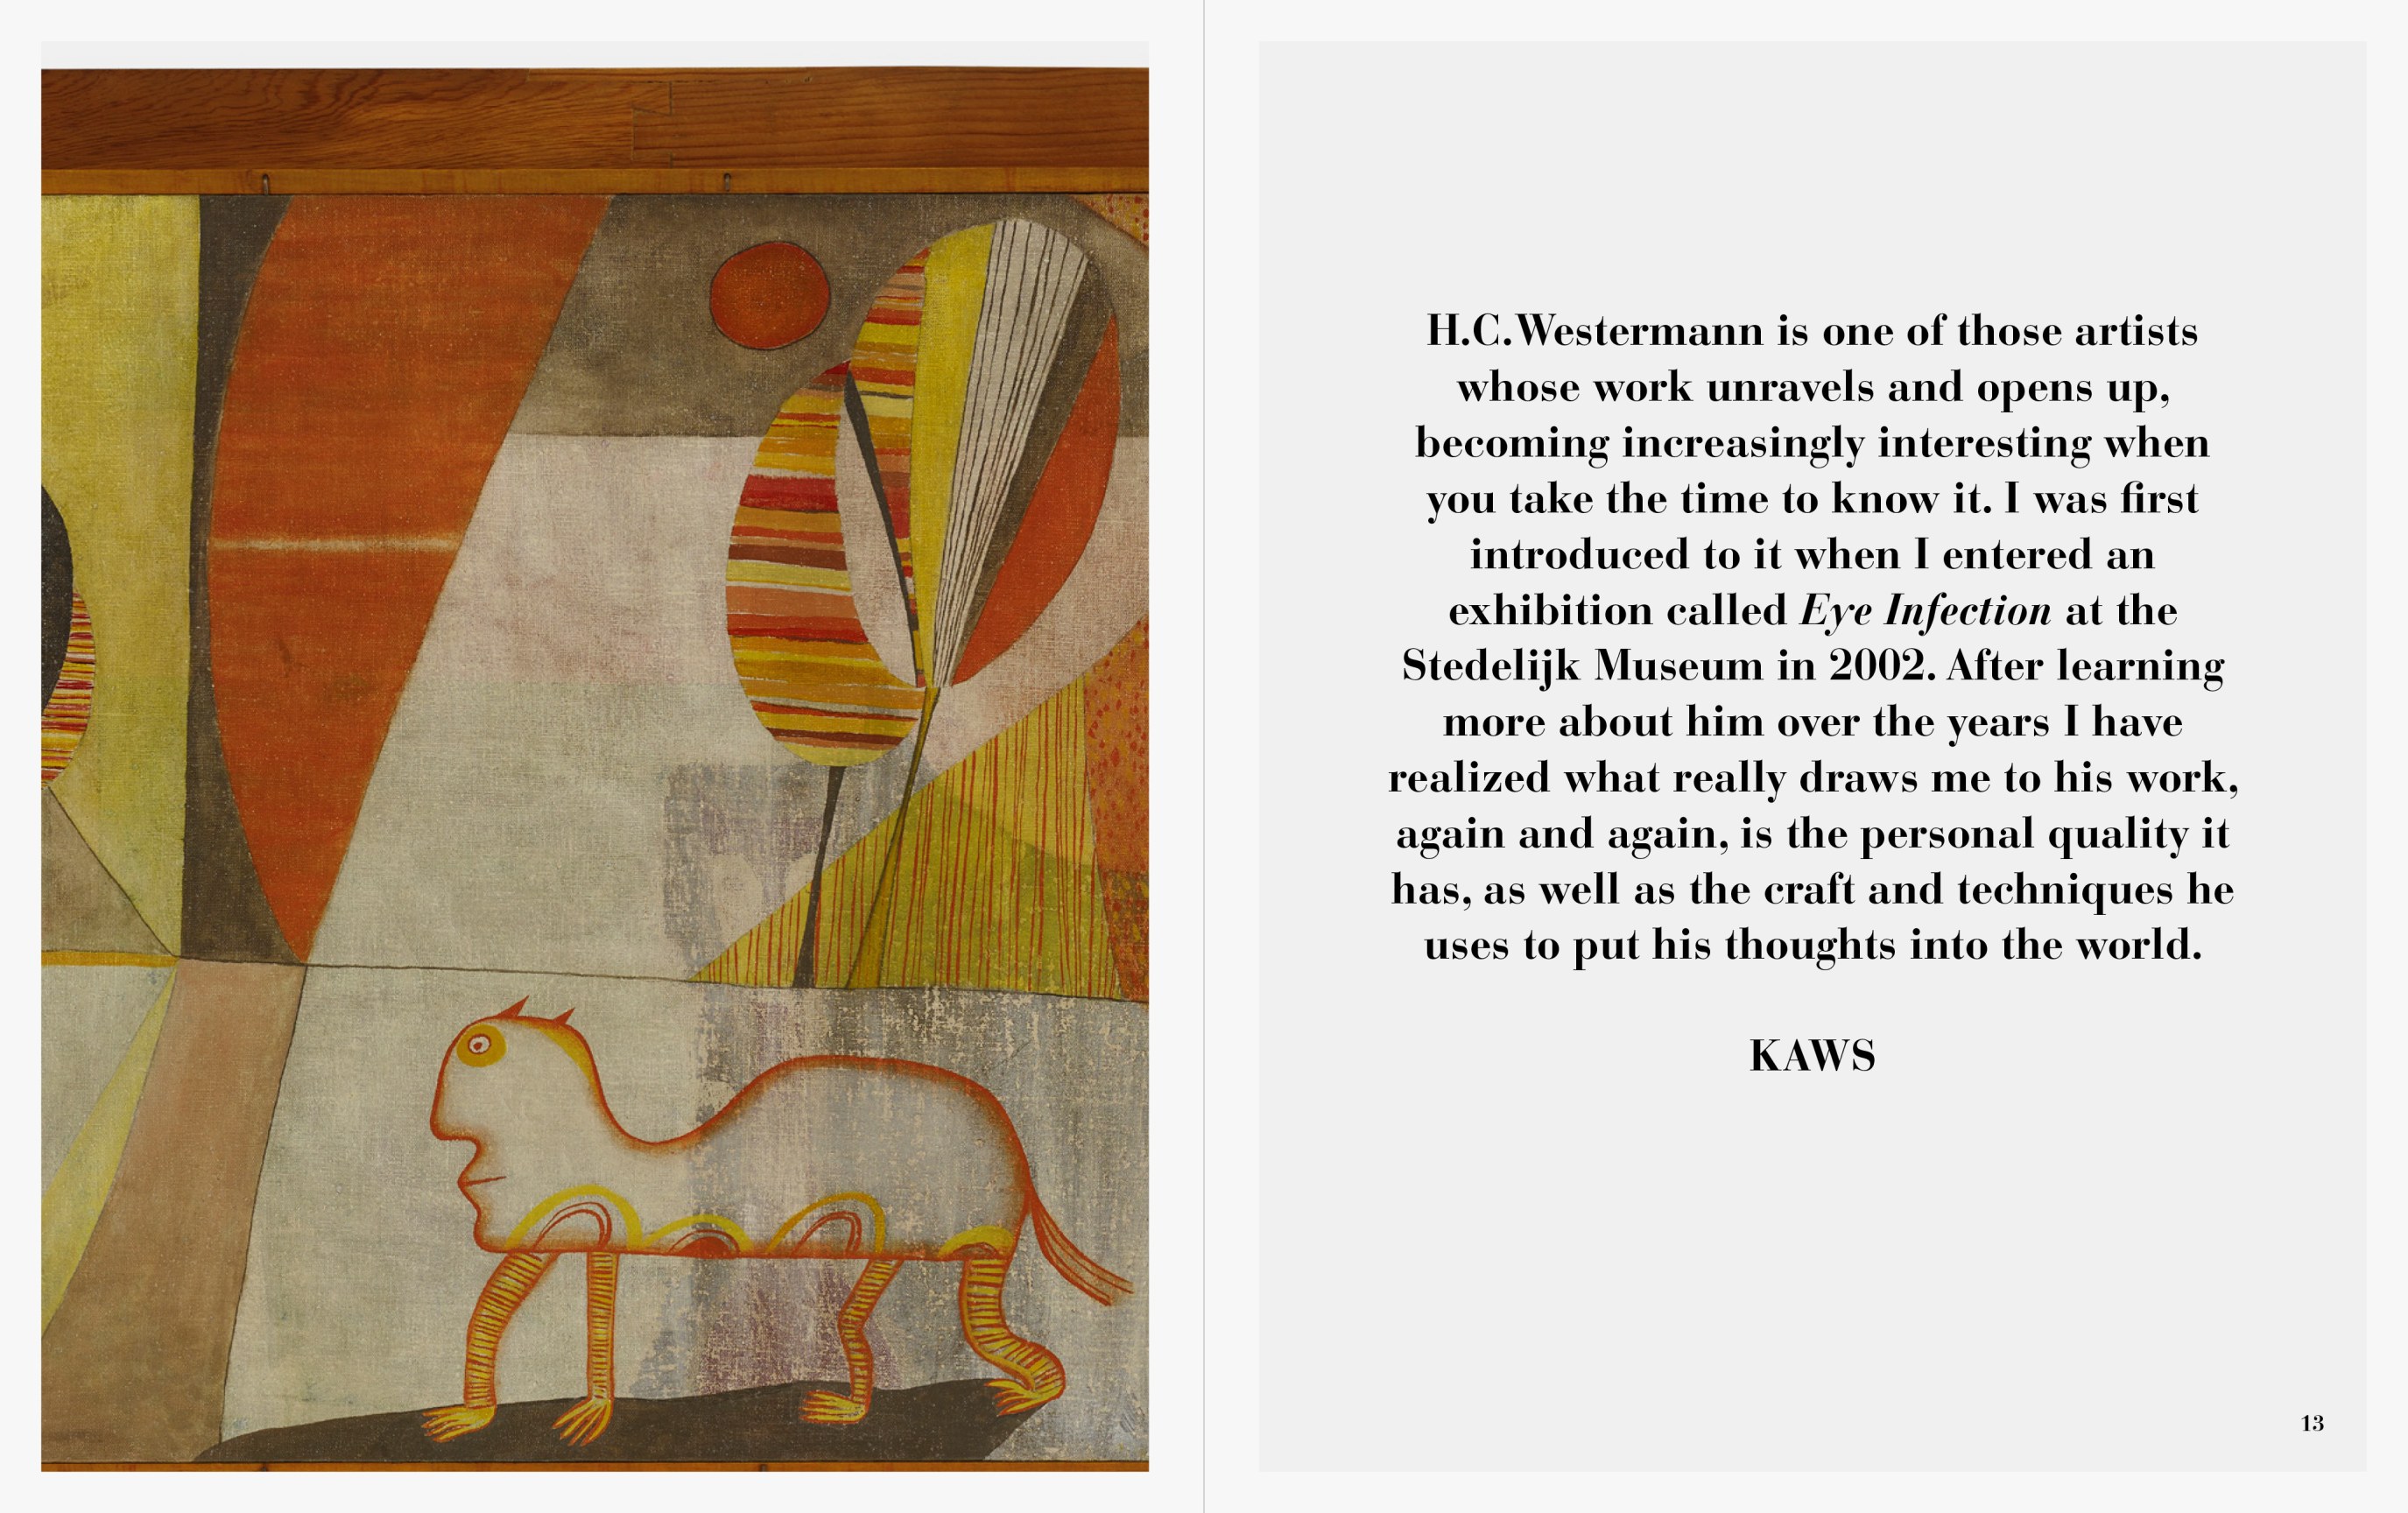 Interior view of of H.C. Westermann, published by Venus Over Manhattan, New York, 2016